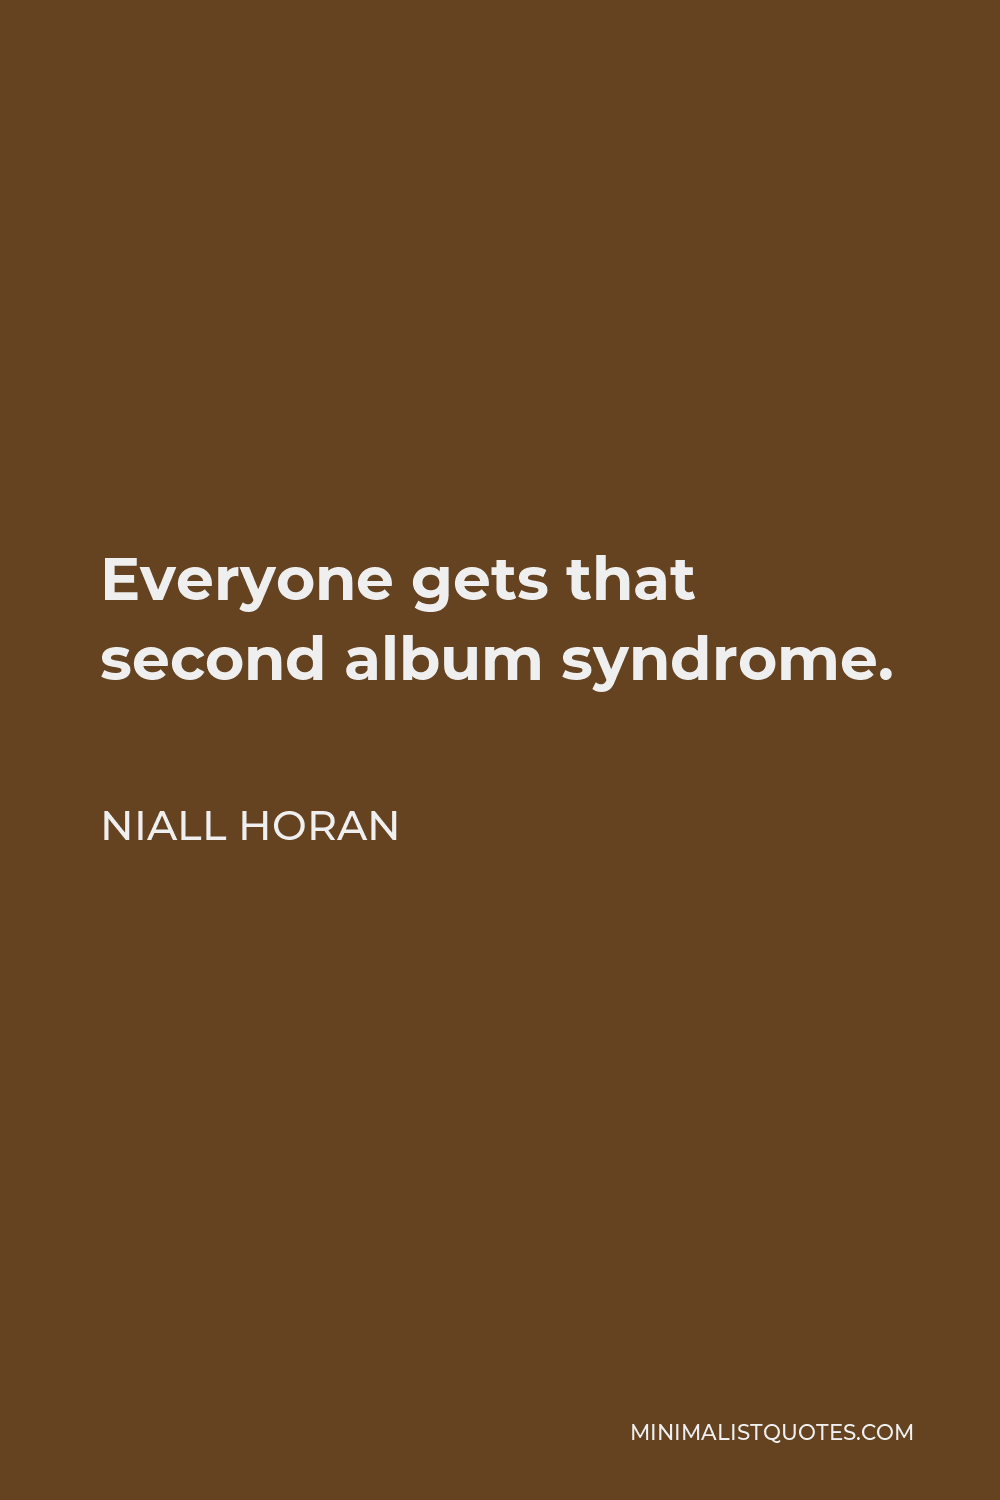 Niall Horan Quote - Everyone gets that second album syndrome.